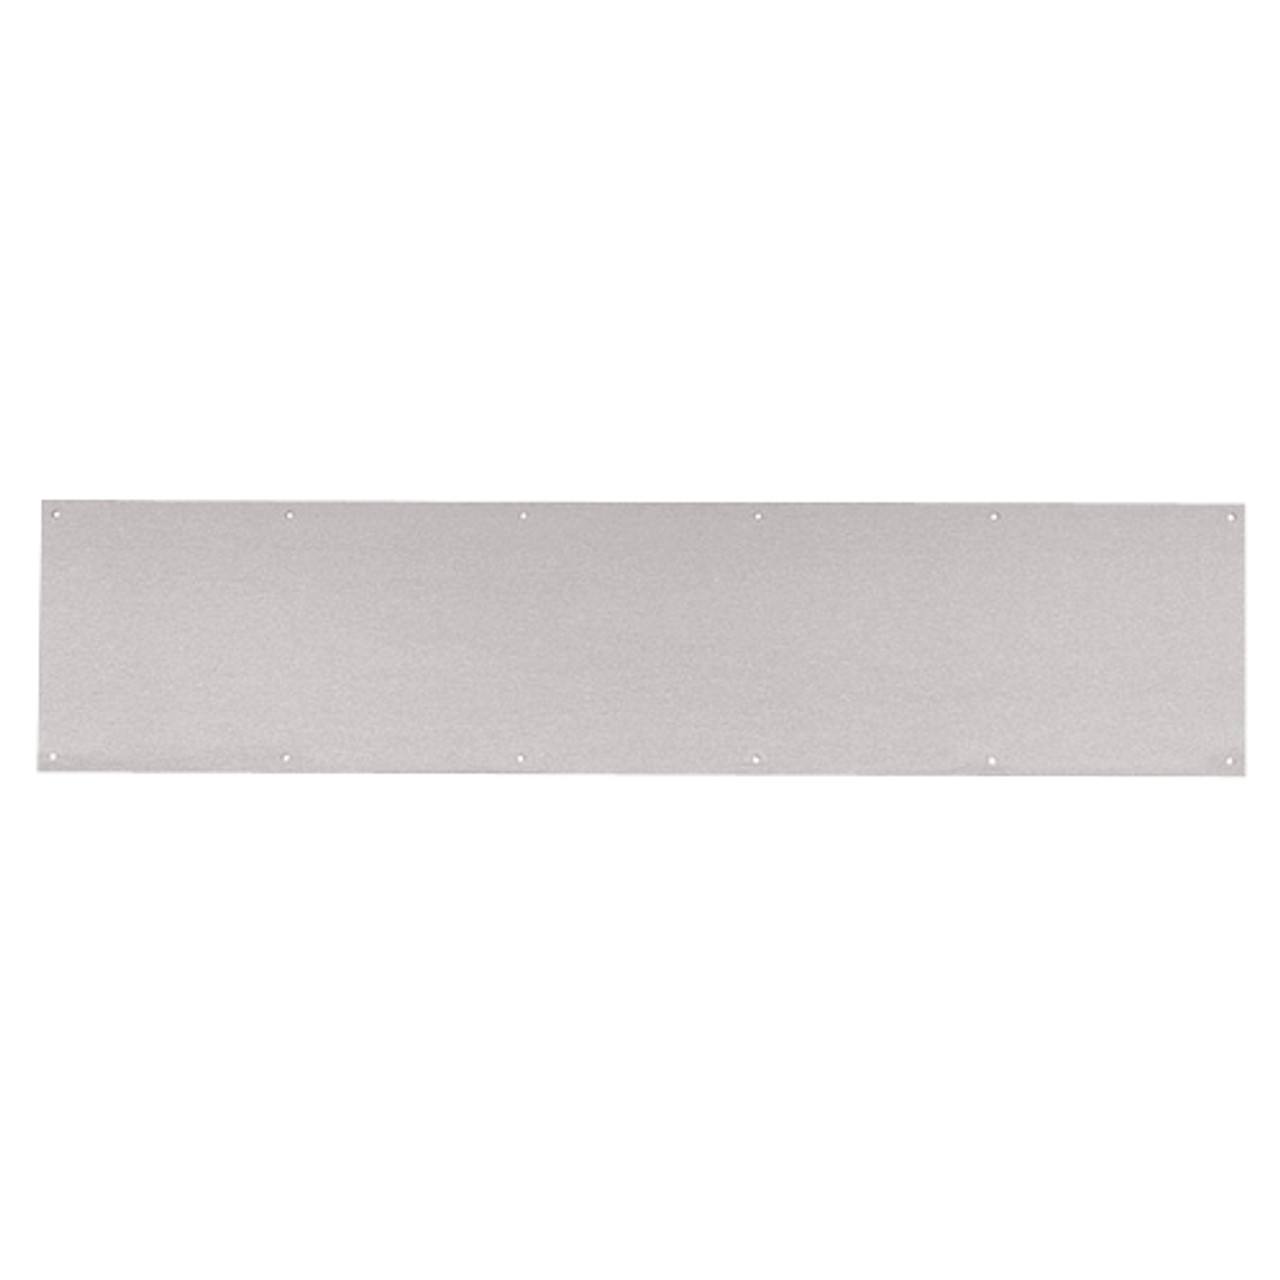 8400-US32D-8x40.5-B-CS Ives 8400 Series Protection Plate in Satin Stainless Steel